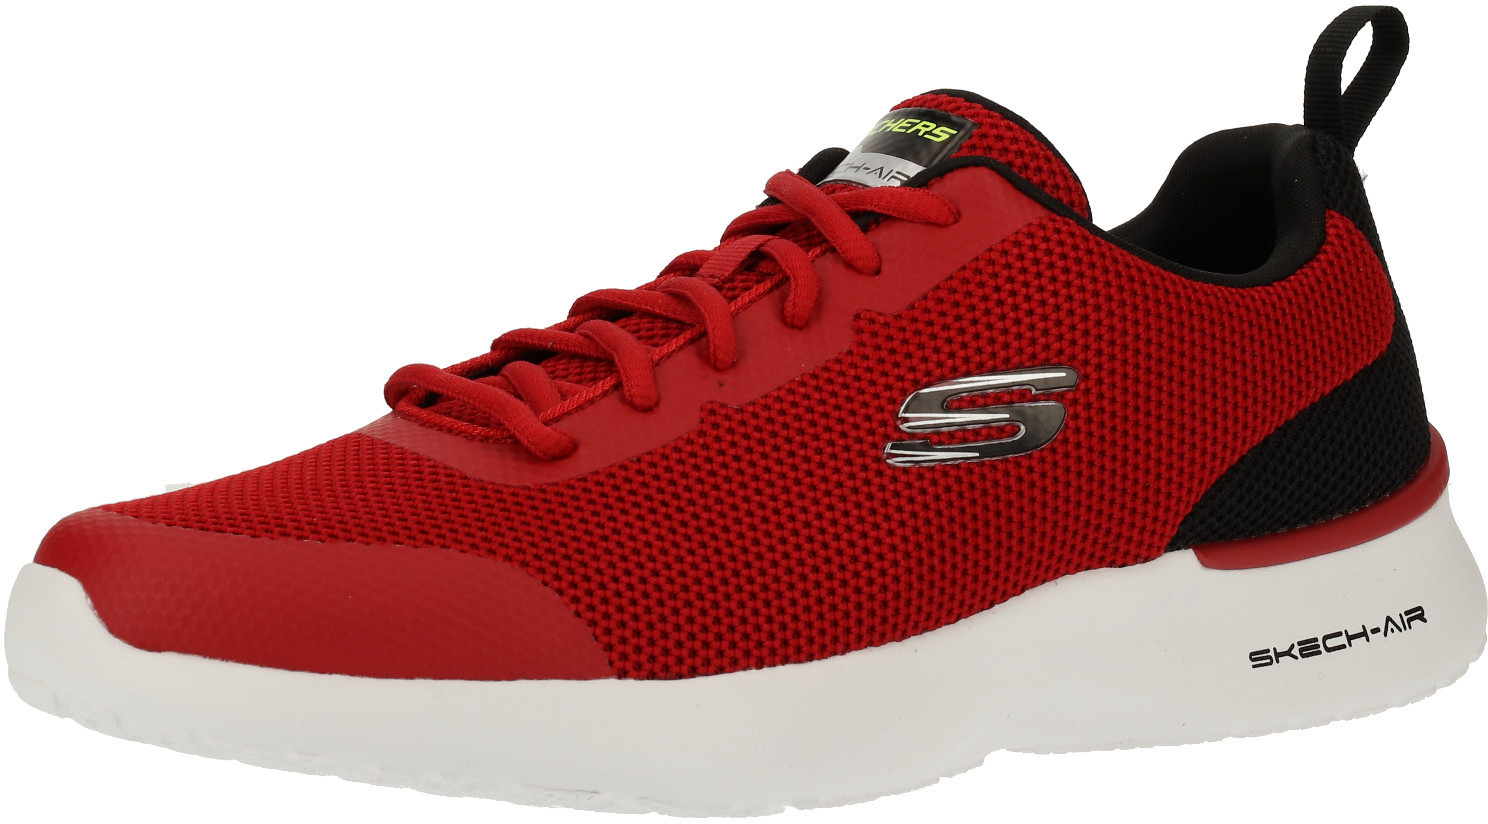 Buy Skechers Skech-Air Dynamight Winly red/black from £52.00 (Today